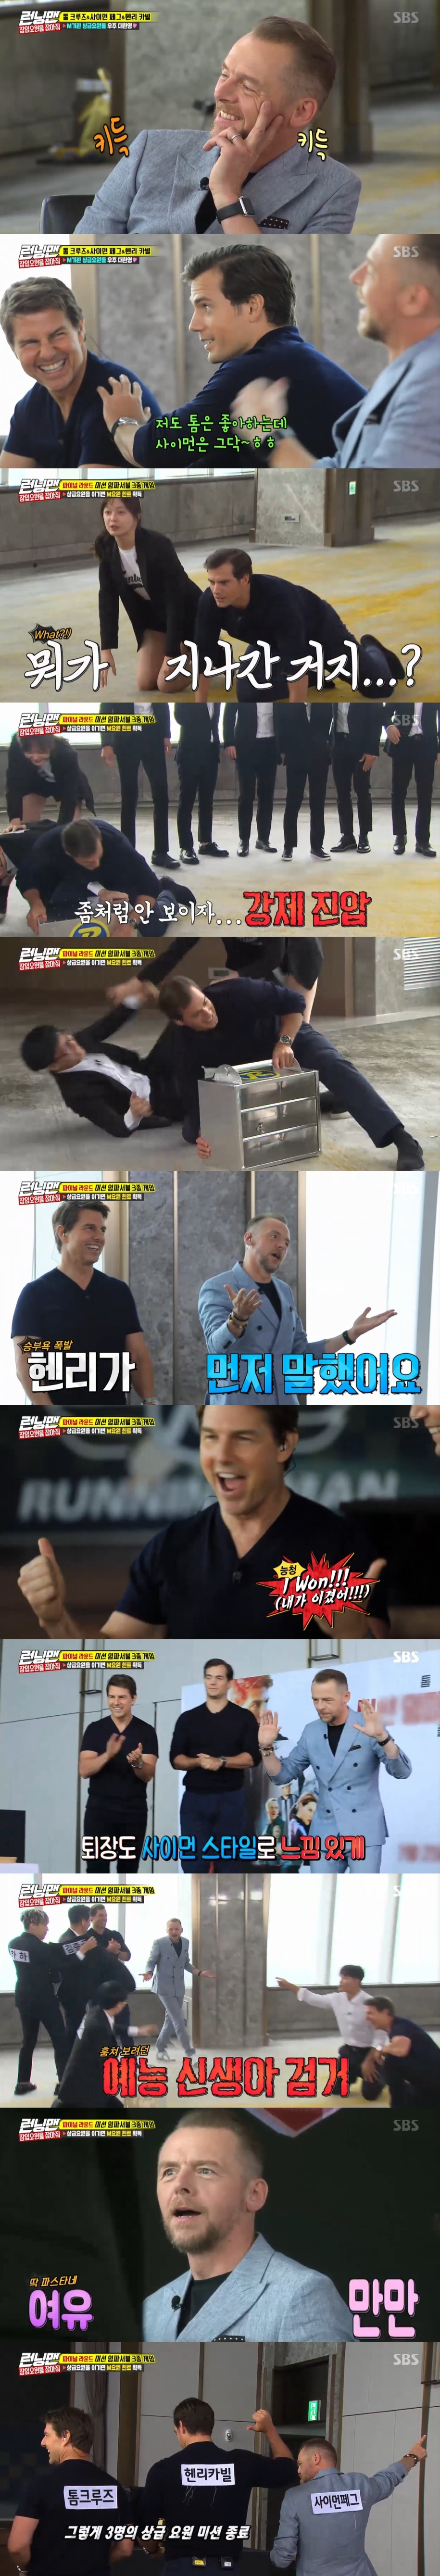 Tom Cruise, Henry Carville and Simon Pegg, the leading characters in the film Mission Impossible: Fall Out (Michael Mission 6), which is about to be released, appeared in the domestic entertainment Running Man for promotional purposes.Those who enthusiastically attracted domestic fans with their appearances have devastated Running Man with a sense of entertainment that exceeds expectations.On SBSs Running Man, which was broadcast on July 22, a race was held to find infiltrators.The Mission 6 trio did not show up until the final round, but even though the shooting period was not long, they showed their crazy presence and focused their attention.On this day, the Mission 6 trio appeared with a sweet smile and enthusiastically attracted the Running Man members. The Running Man members welcomed the three people to the level of reunion of separated families.As soon as the trio came, they responded by posing various fingers hearts. The heart attack of the world class re-entertainers shook the Running Man filming scene.The Mission 6 trio tit-for-tat on each other during the talk, especially Simon Peggs witty jokes, which set the tone.Henry Carville said that the three people were strong, but Simon Pegg joked that I am not a friend, and Henry Carville also responded wittyly.Henry Carville, meanwhile, tells Henry Carville the secret to his sturdy body, and he laughs at Henry Carville by adding a single step (?) Be quiet, you are talking to good men.So MC Yoo Jae-seok said, It is similar to us.The first Game I ever met was the Mission 6 trios sense of entertainment. The first Game was to hit an object in an iron bag.The first runner, Simon Pegg, was nervous about the iron bag Game, but he started to concentrate, so focused that he crawled to the iron bag and apologized.Simon Pegg, who was into the iron bag Game, was angry at MC Yoo Jae-seoks ability to hide his iron bag and kneel down.Simon Pegg made viewers navel with an entertainment optimization character.Henry Carville was next in line, and when he could hardly see anything in his iron bag, he was forced to suppress it and even embarrassed Yoo Jae-seok. Henry Carbell, who had exploded in a fight, did not hesitate to foul.Henry Carville drove Yoo Jae-seok out of the camera and gave the members the originality of It is Kim Jong Kook of the United States and Superman is what it is.Henry Carville was pure and naturally fouled, and he focused his attention.The last Tom Cruise was also eye-catching, and Tom Cruise, who exploded in a fight, surprised everyone by hitting the matchstick hidden in his iron bag.As Tom Cruise answered the right answer, senior agents (the Mission 6 trio) vomited victory in all three editions.The second Game was a Game where you had to put your hand next to the mystery box and guess what the object was inside.Simon Pegg was right in answer, showing off his artistic genius, and Henry Carville had finished the Game, which would have taken 20 minutes if the members had done it.I was chased by a helicopter driven by Tom Truz. Tom Cruise also hit a moving toy snake like a ghost.Tom Cruise won and looked the worlds sunny. The mystery box Game was unintentionally a speed quiz because of the three Mission 6.The last was Uncle Tongs Game, which surprised Song Ji-hyo, who was nervous about getting caught, and showed his perfect adaptation to Korean entertainment, such as playing with Lee Kwang-soo of the United Kingdom.Tom Cruise also revealed the aspect of an entertainment sponge that also receives the song Mission series.In addition, Tom Cruise, despite the fact that Mr. Tong was caught, liked him like a child as if he had won.The charm of the Mission 6 trio was not the end here; they did not leave the pRace too nicely, but lined up only where the production team designated it.We are learning, we know where to stand, the Mission 6 trio said.bak-beauty